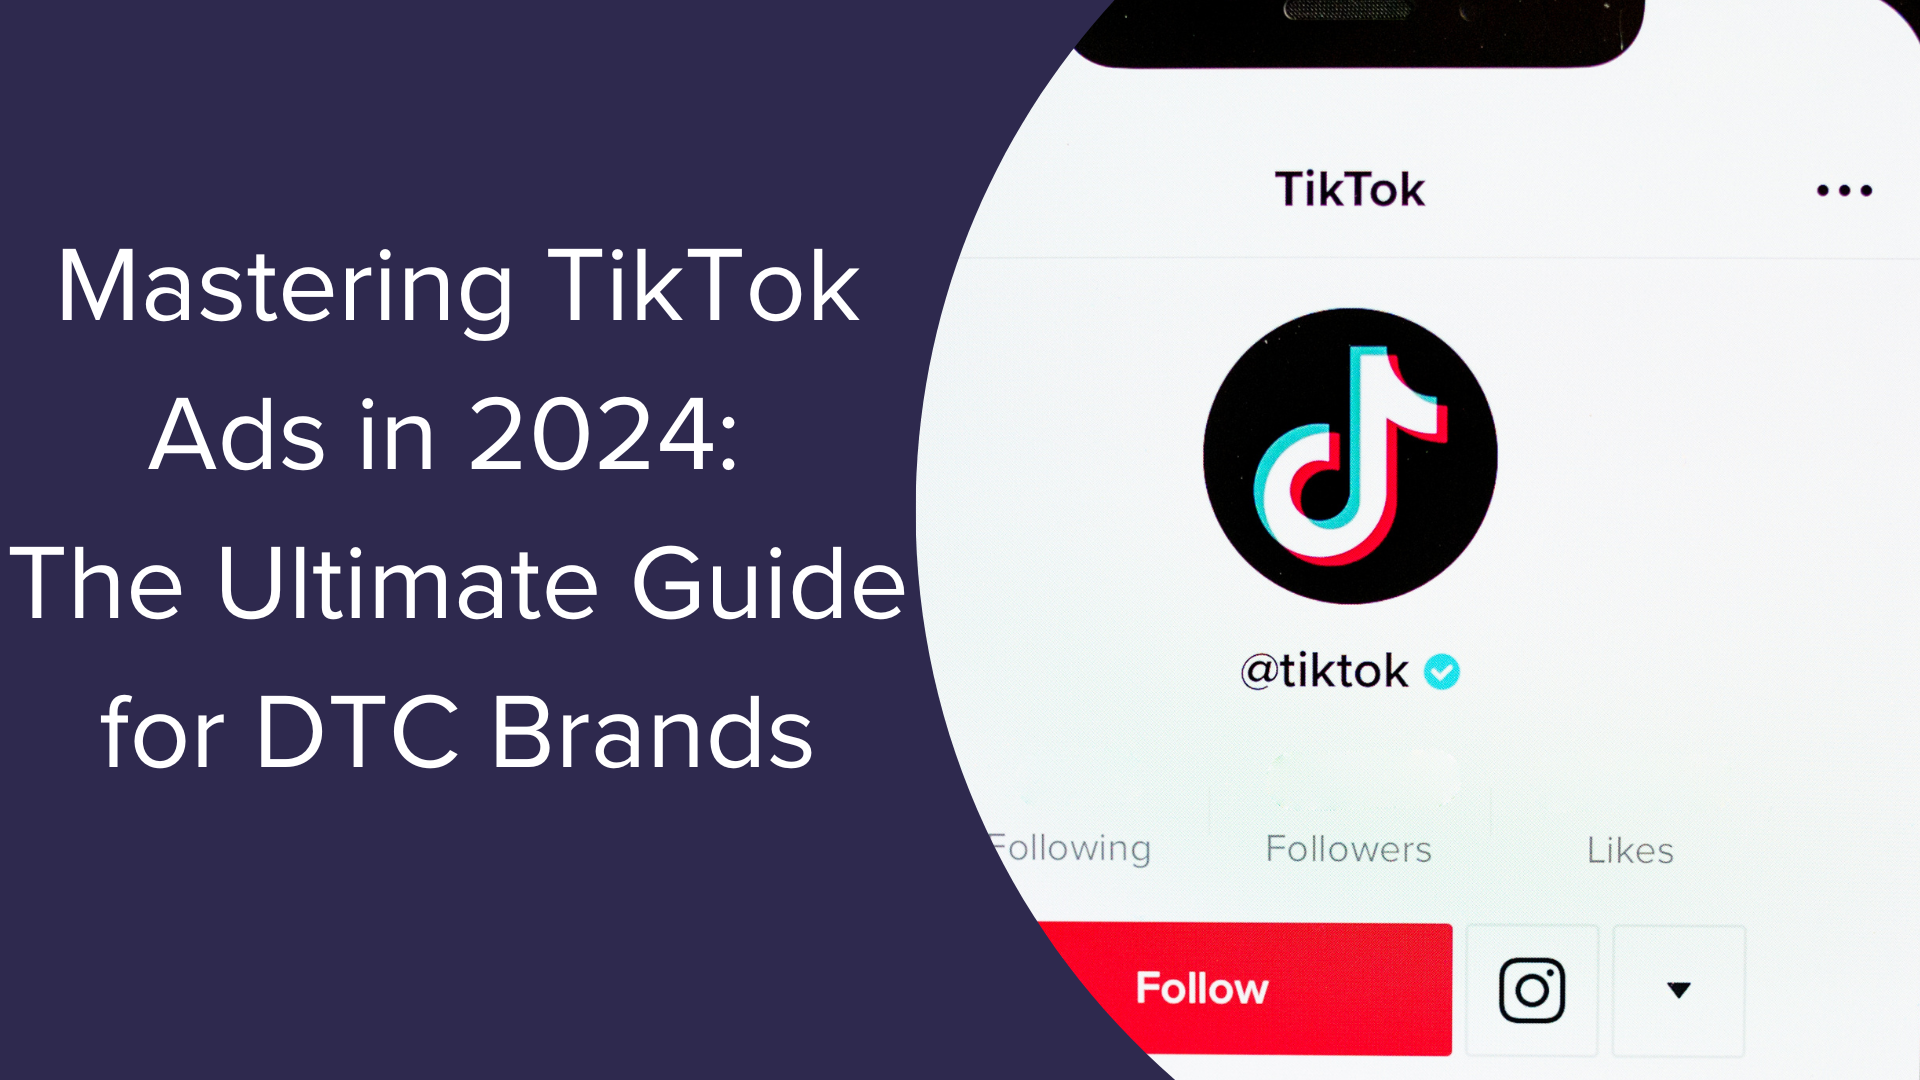 Mastering TikTok Ads in 2024: The Ultimate Guide for DTC Brands